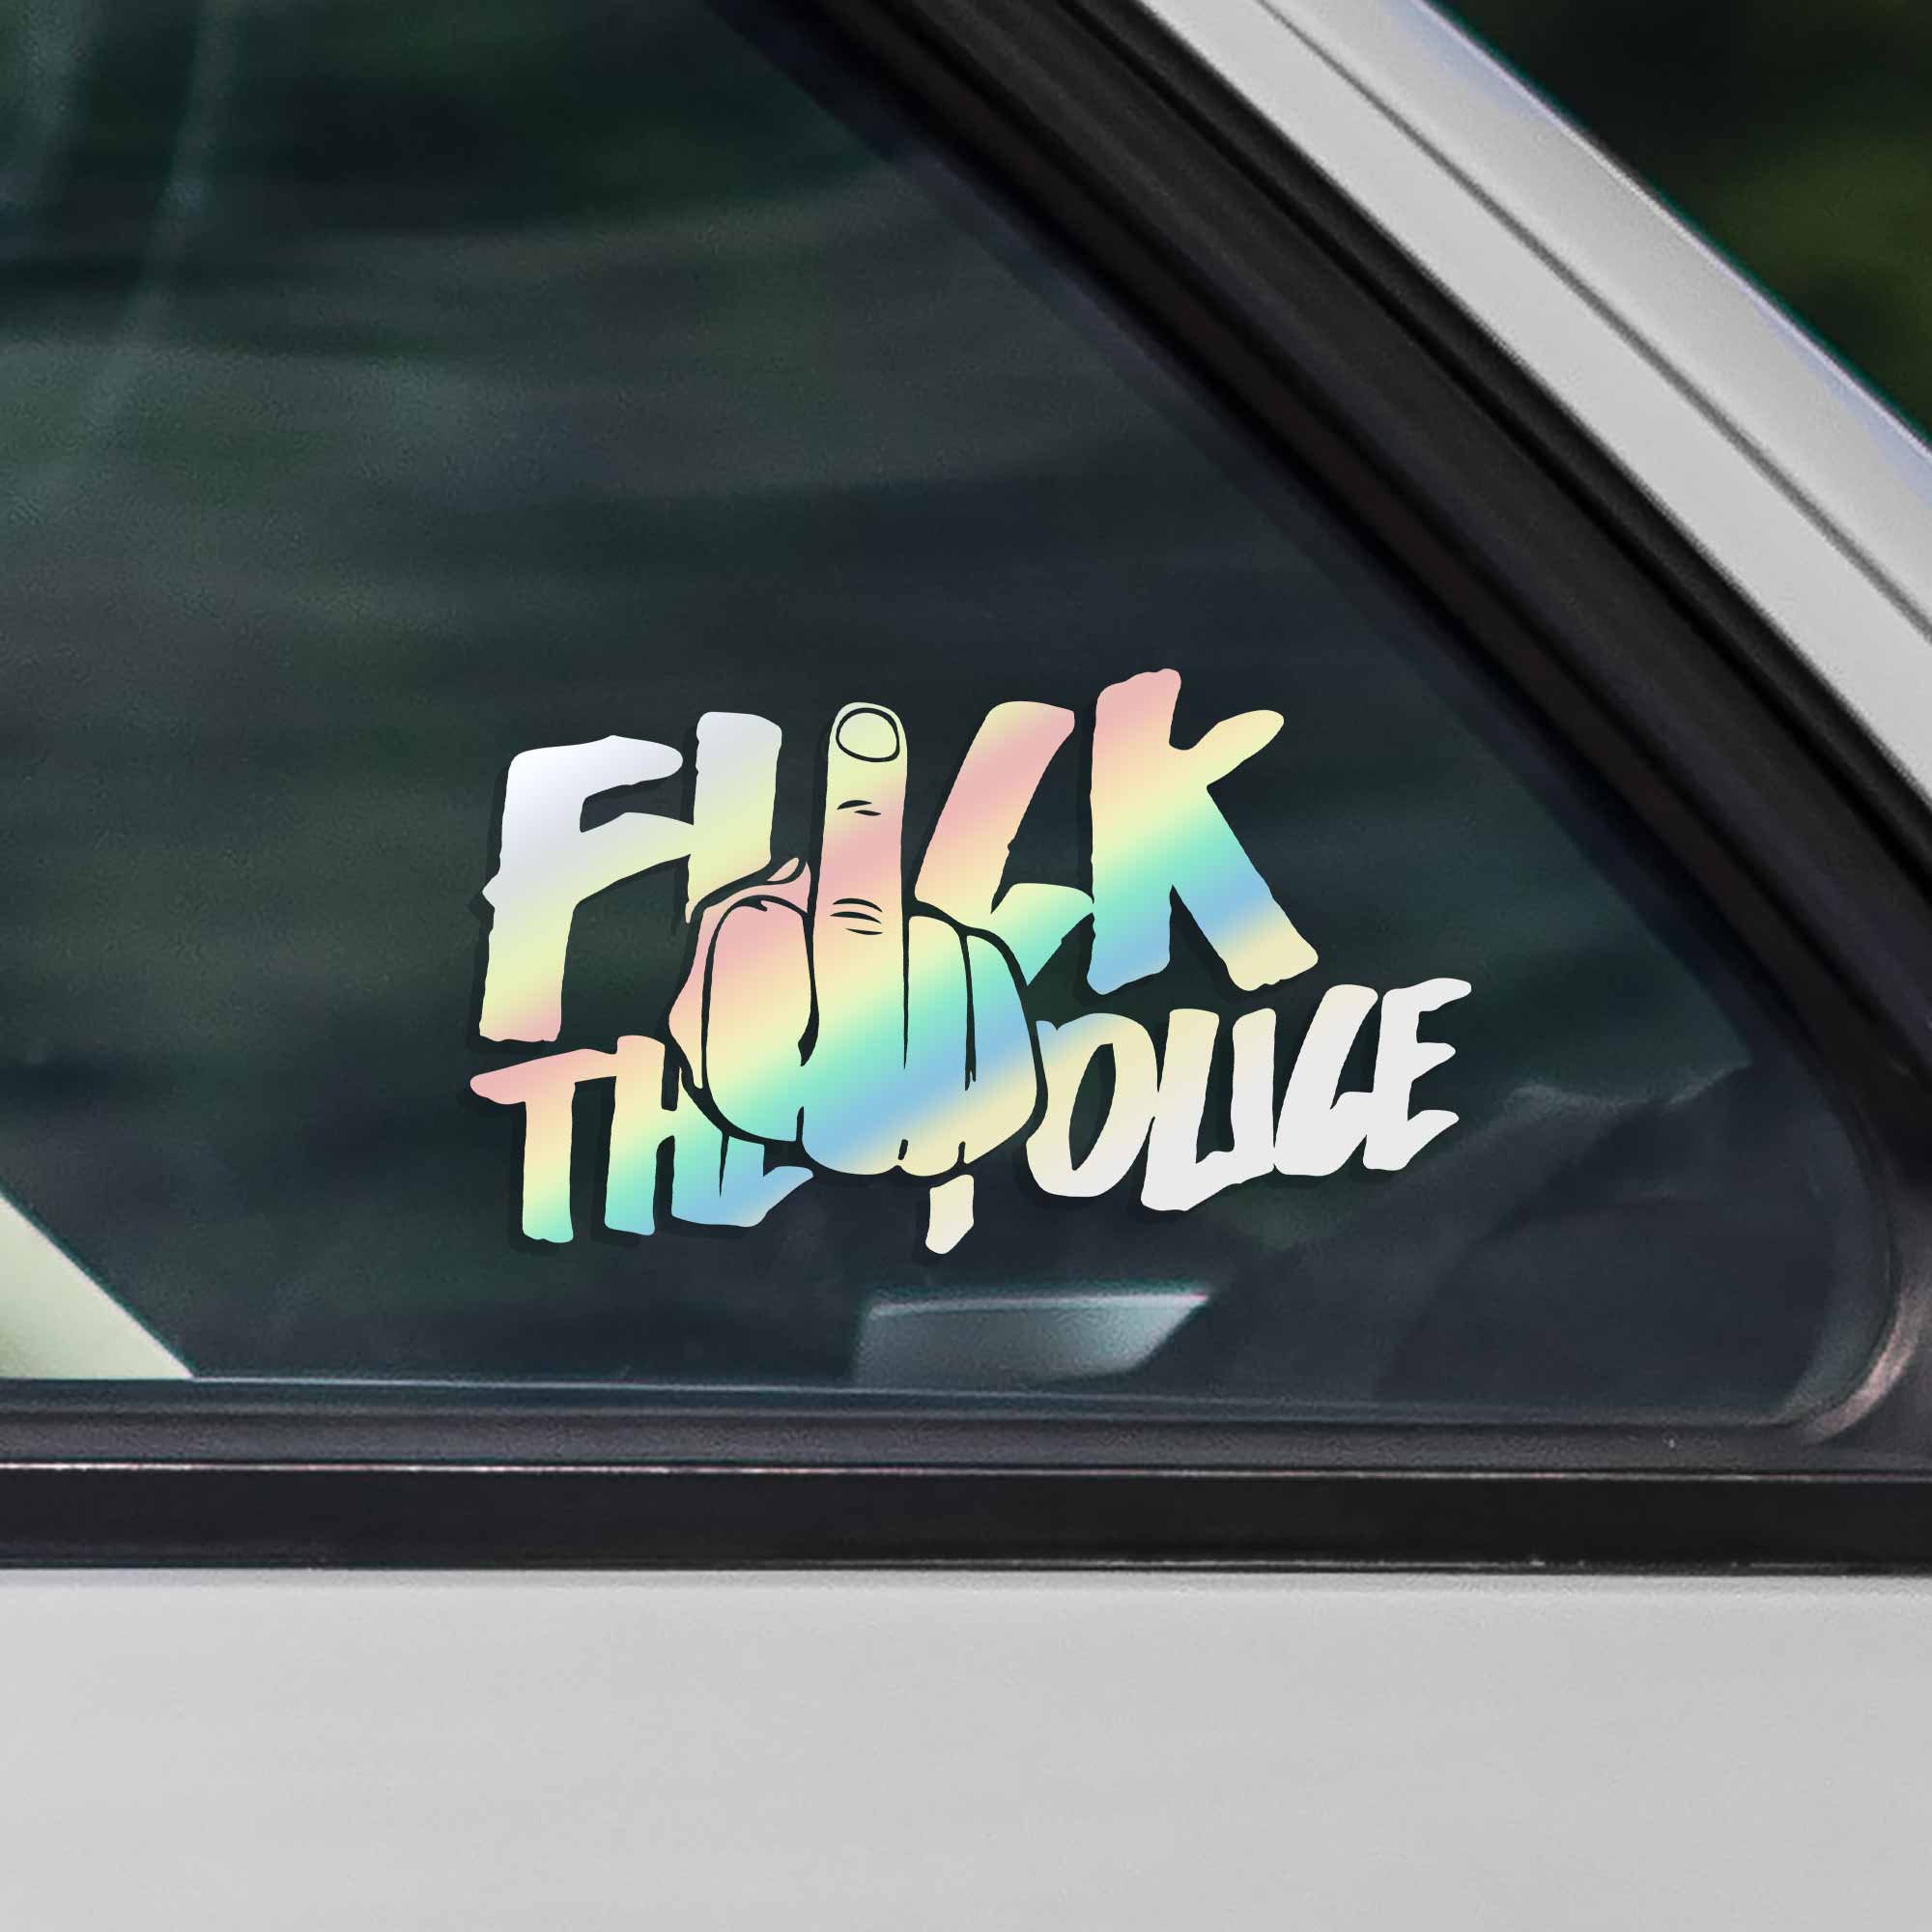 Fuck The Police sticker inspired by the punk and a.c.a.b. ideas. For cars and trucks. The hand flips off and covers some letters. Available in white and rainbow colors.